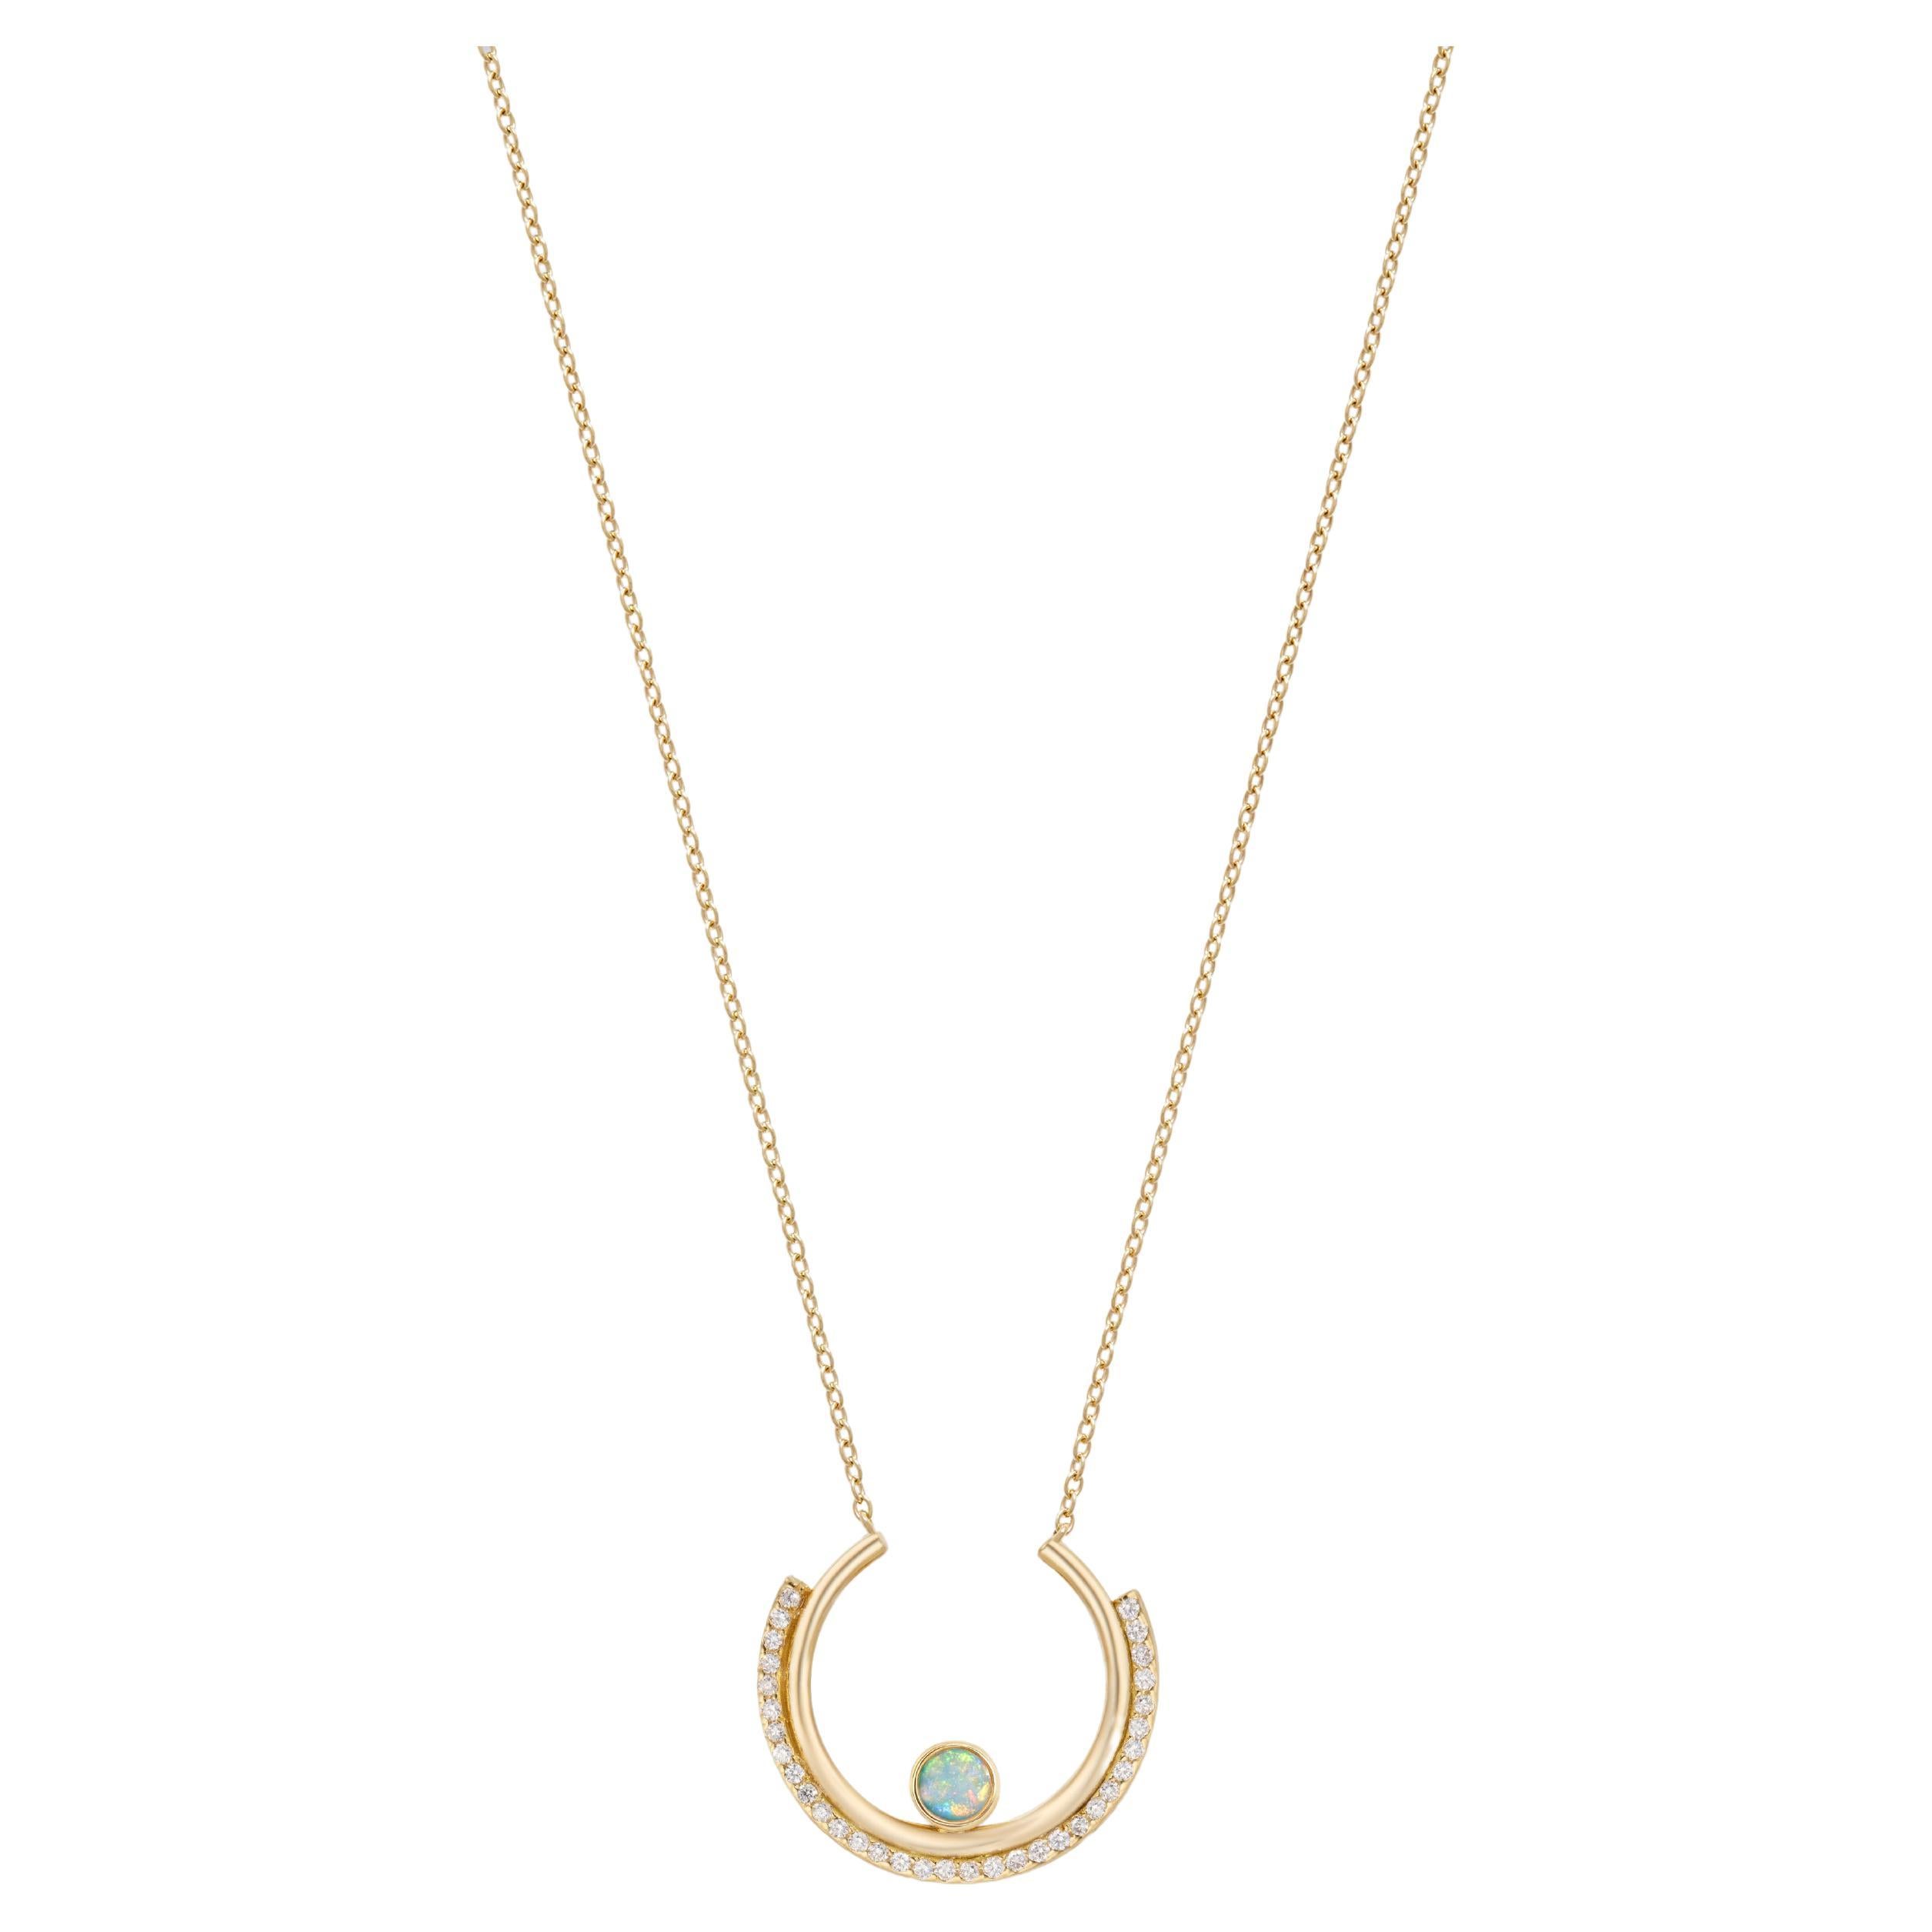 Casey Perez Gold Arc Necklace with Opal and Brilliant Cut Diamonds on Gold Chain For Sale